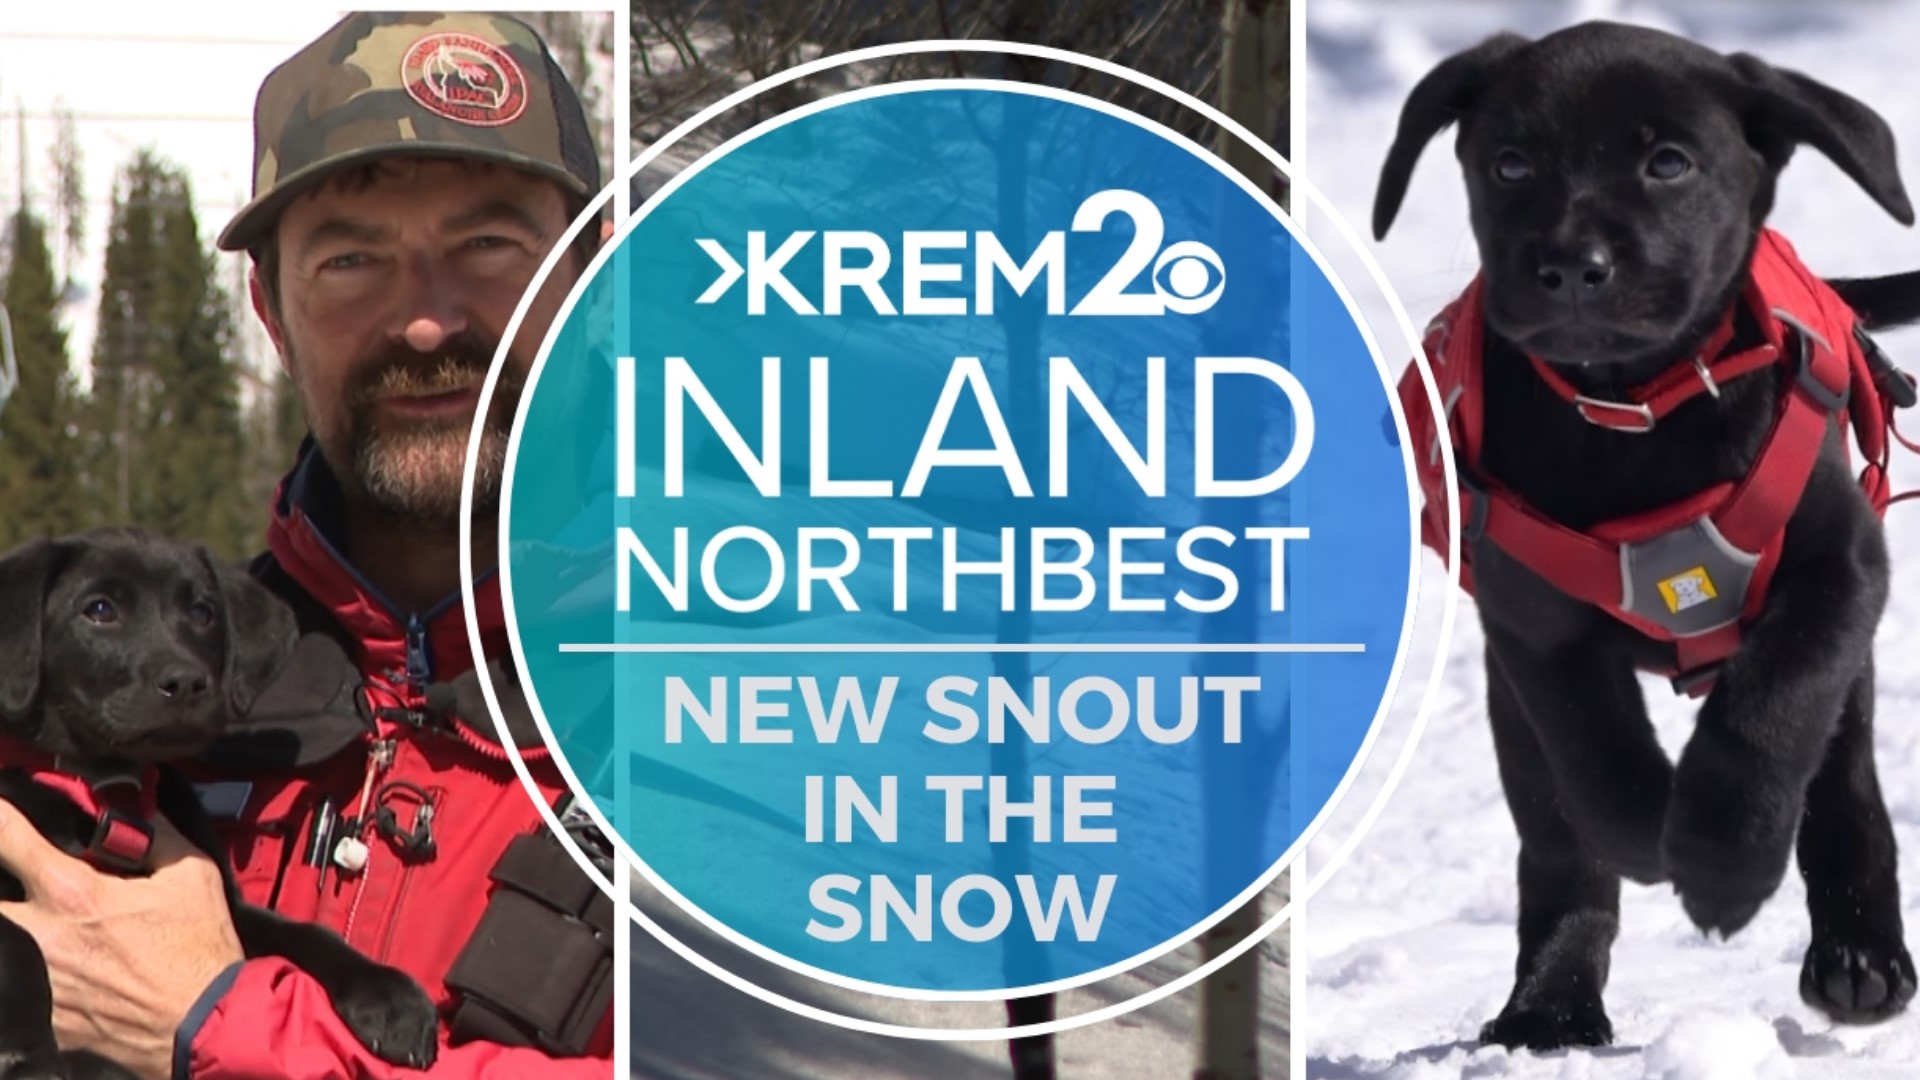 Reba is 9 weeks old, and she's getting ready to be the newest member of Schweitzer Ski Patrol. Check out the Inland Northbest with KREM 2's Dave Somers.